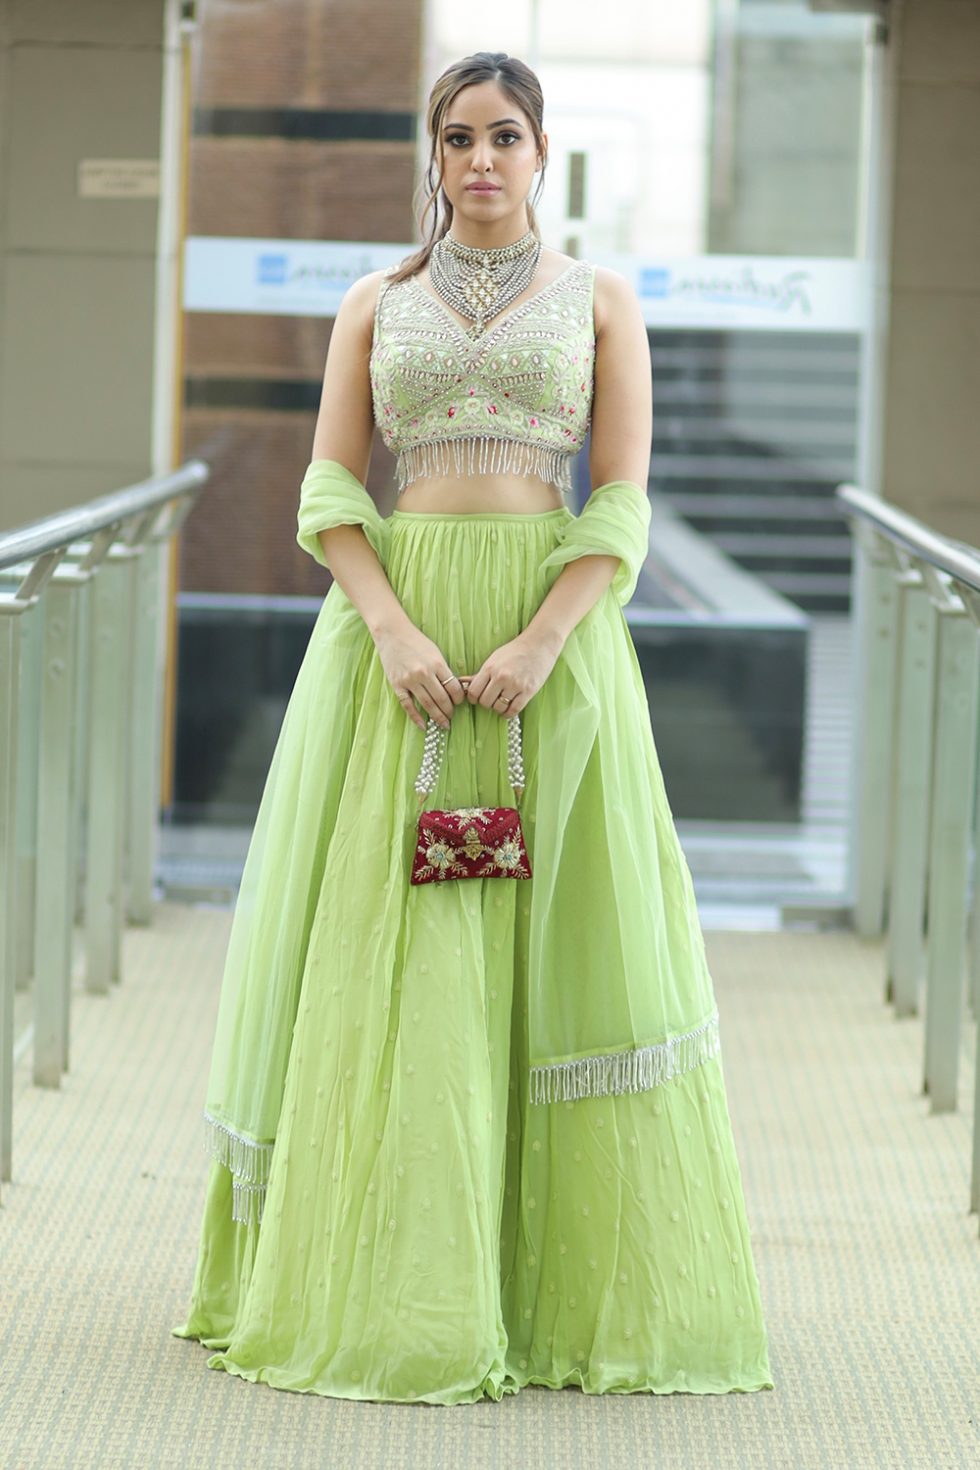 The Most Innovative Ways to Match Your Jewellery and Lehenga! | WedMeGood